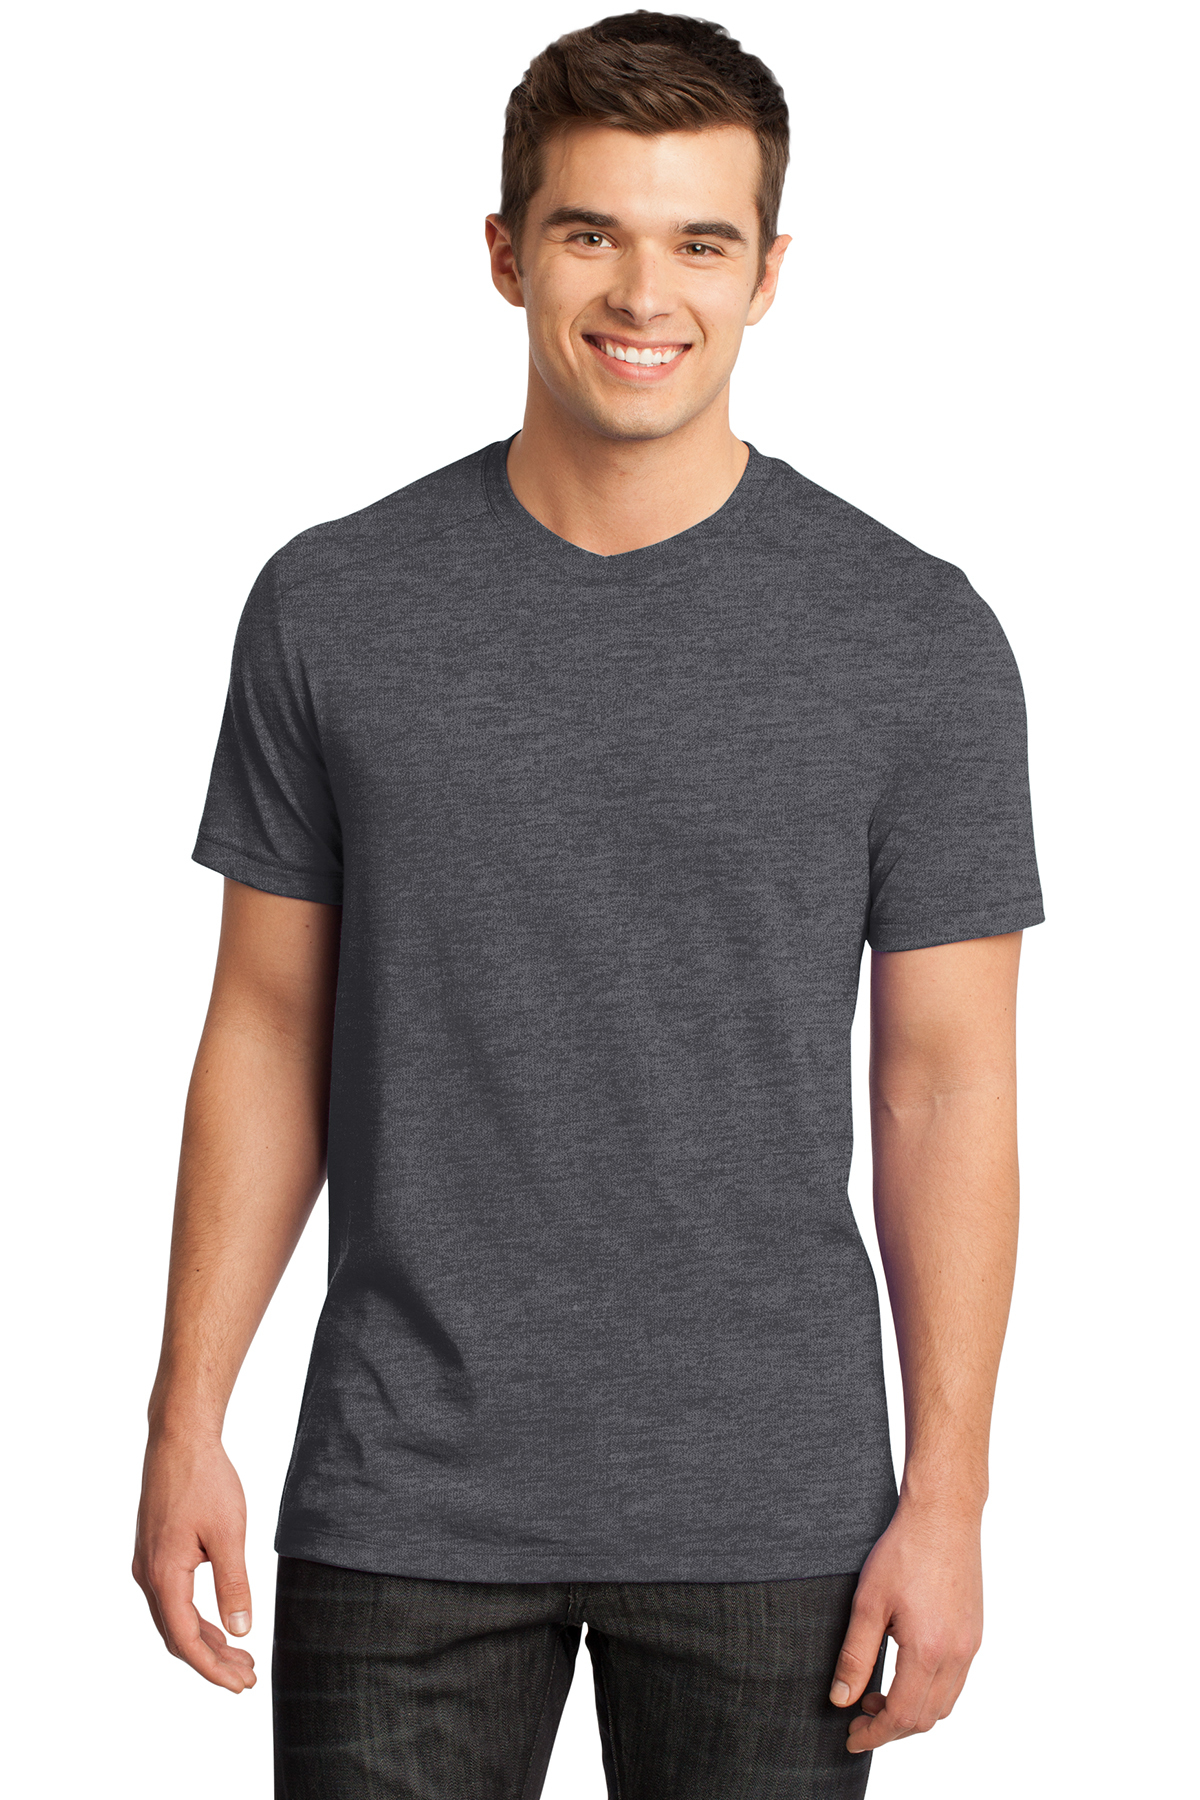 District - Young Mens Gravel 50/50 Notch Crew Tee. DT1400